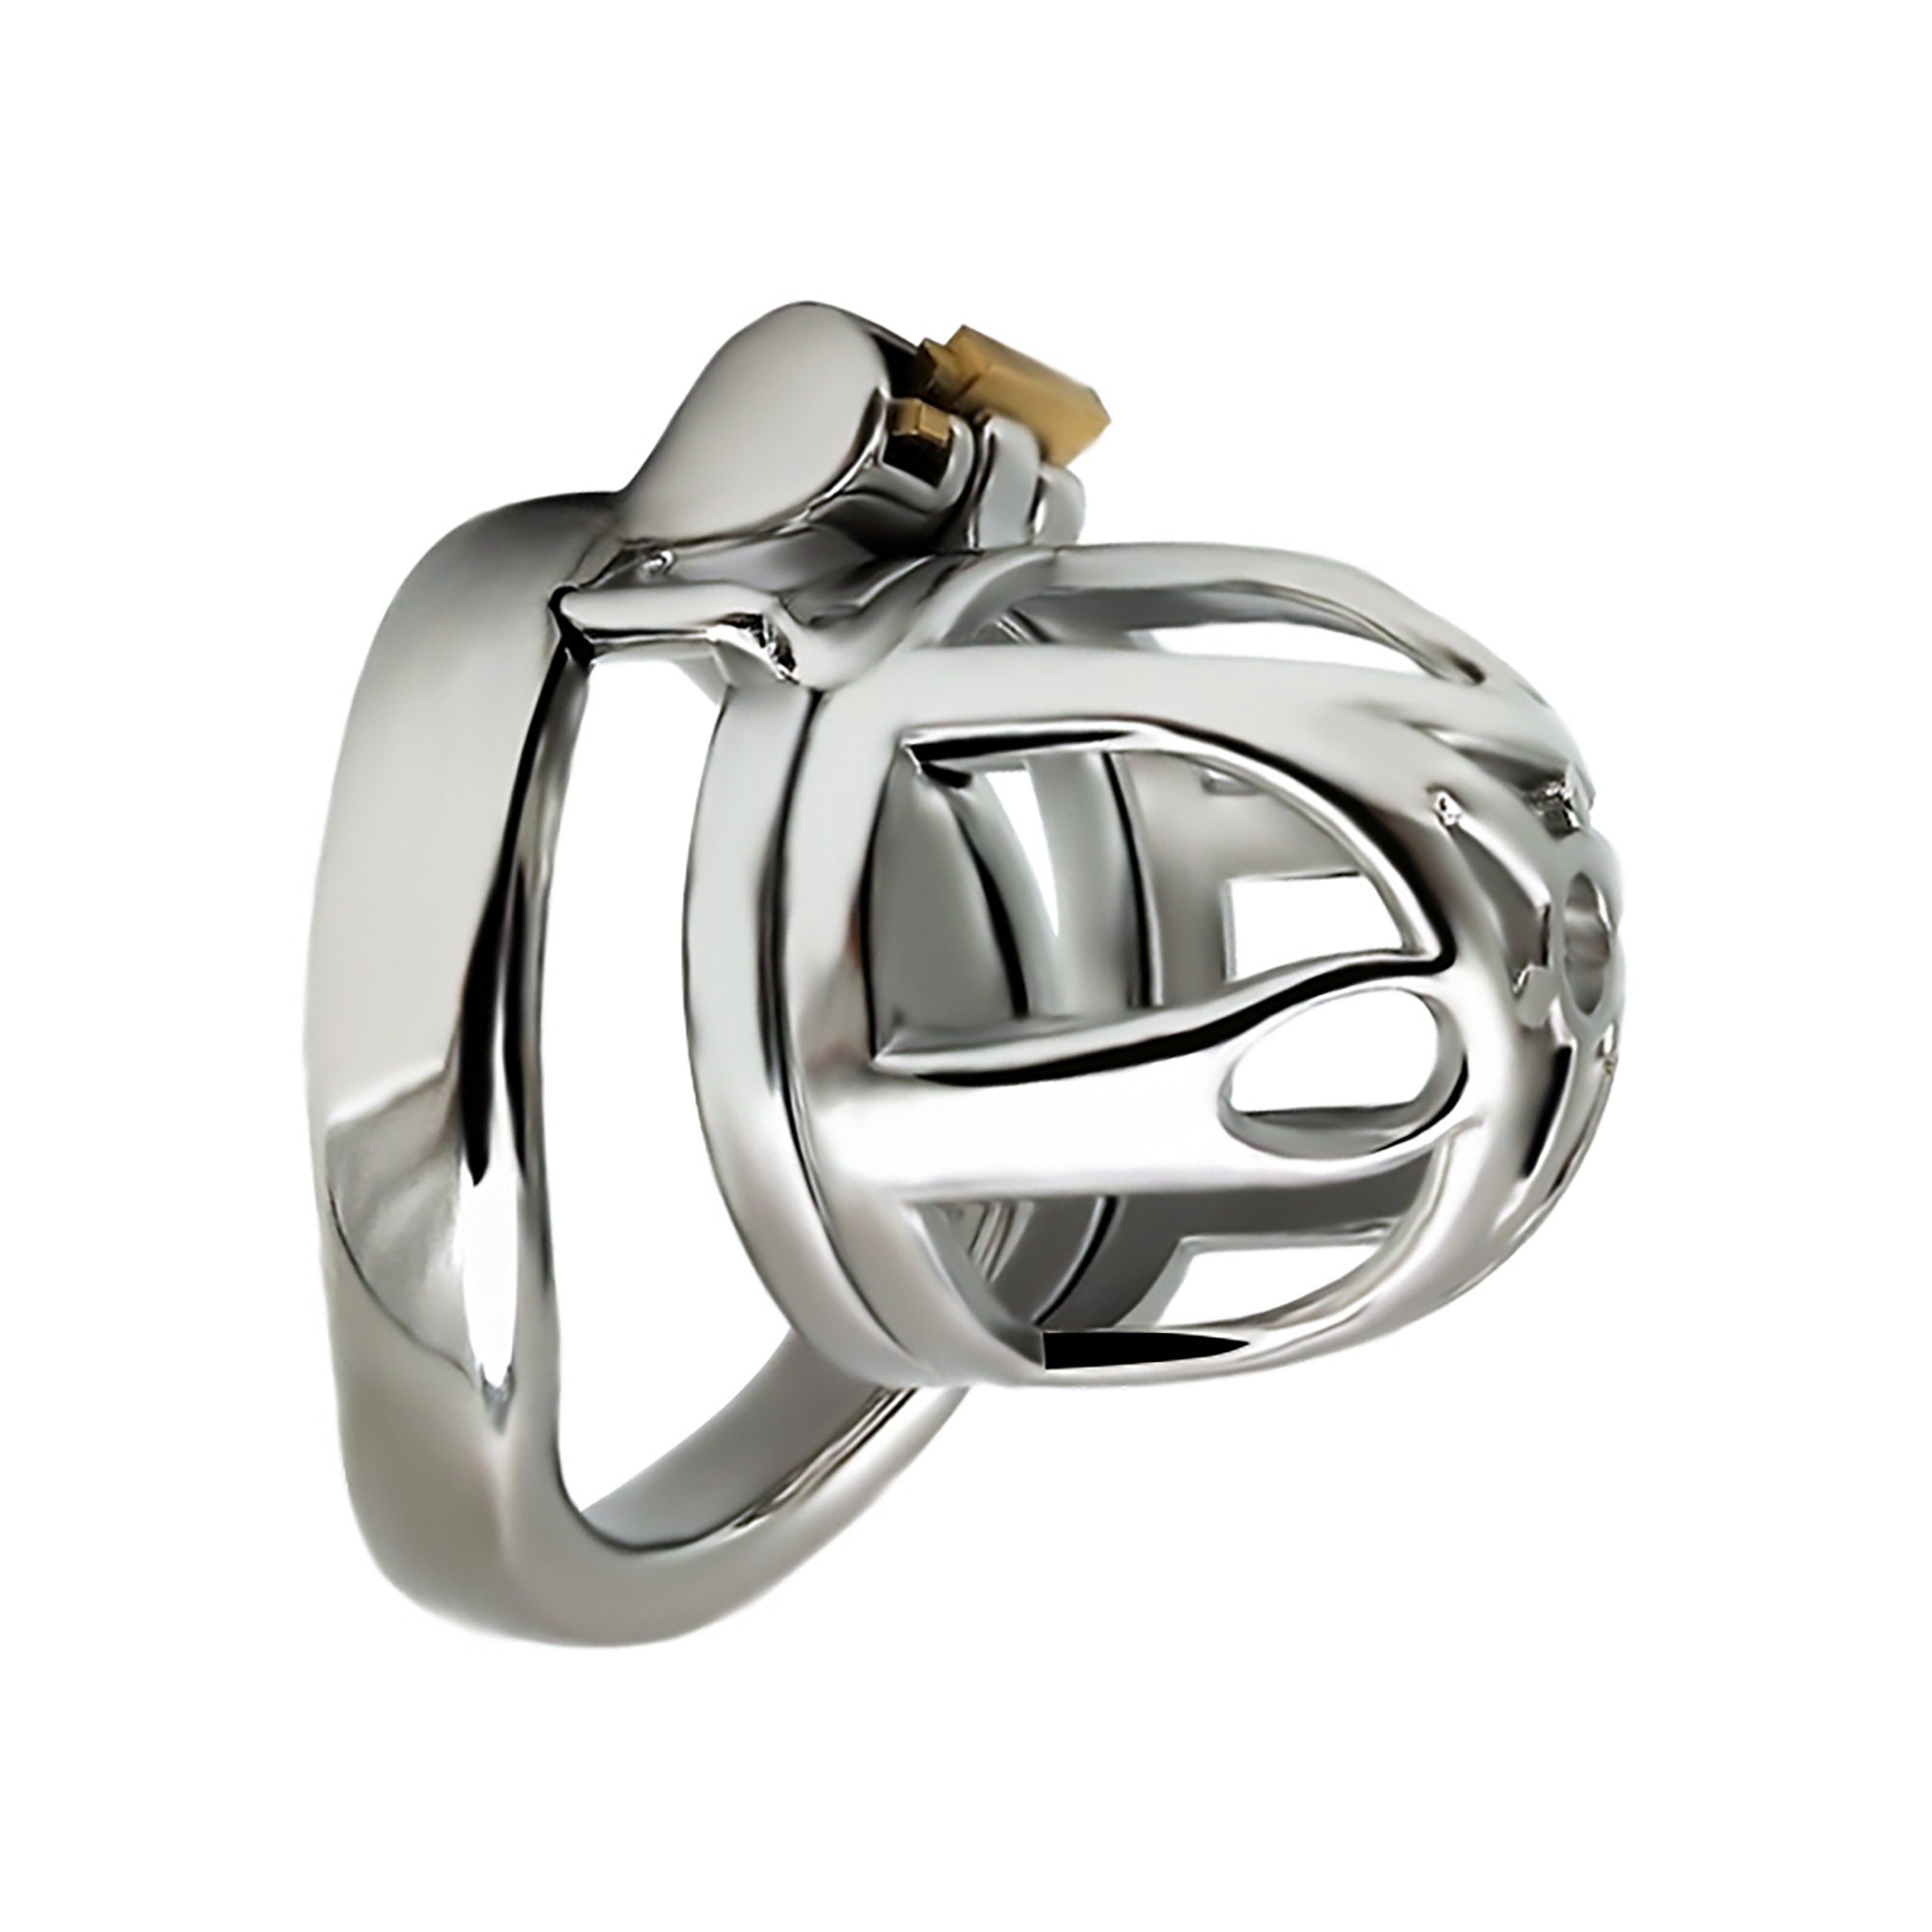 35mm Chastity Cage Small Metal Male BDSM Sex Toys for